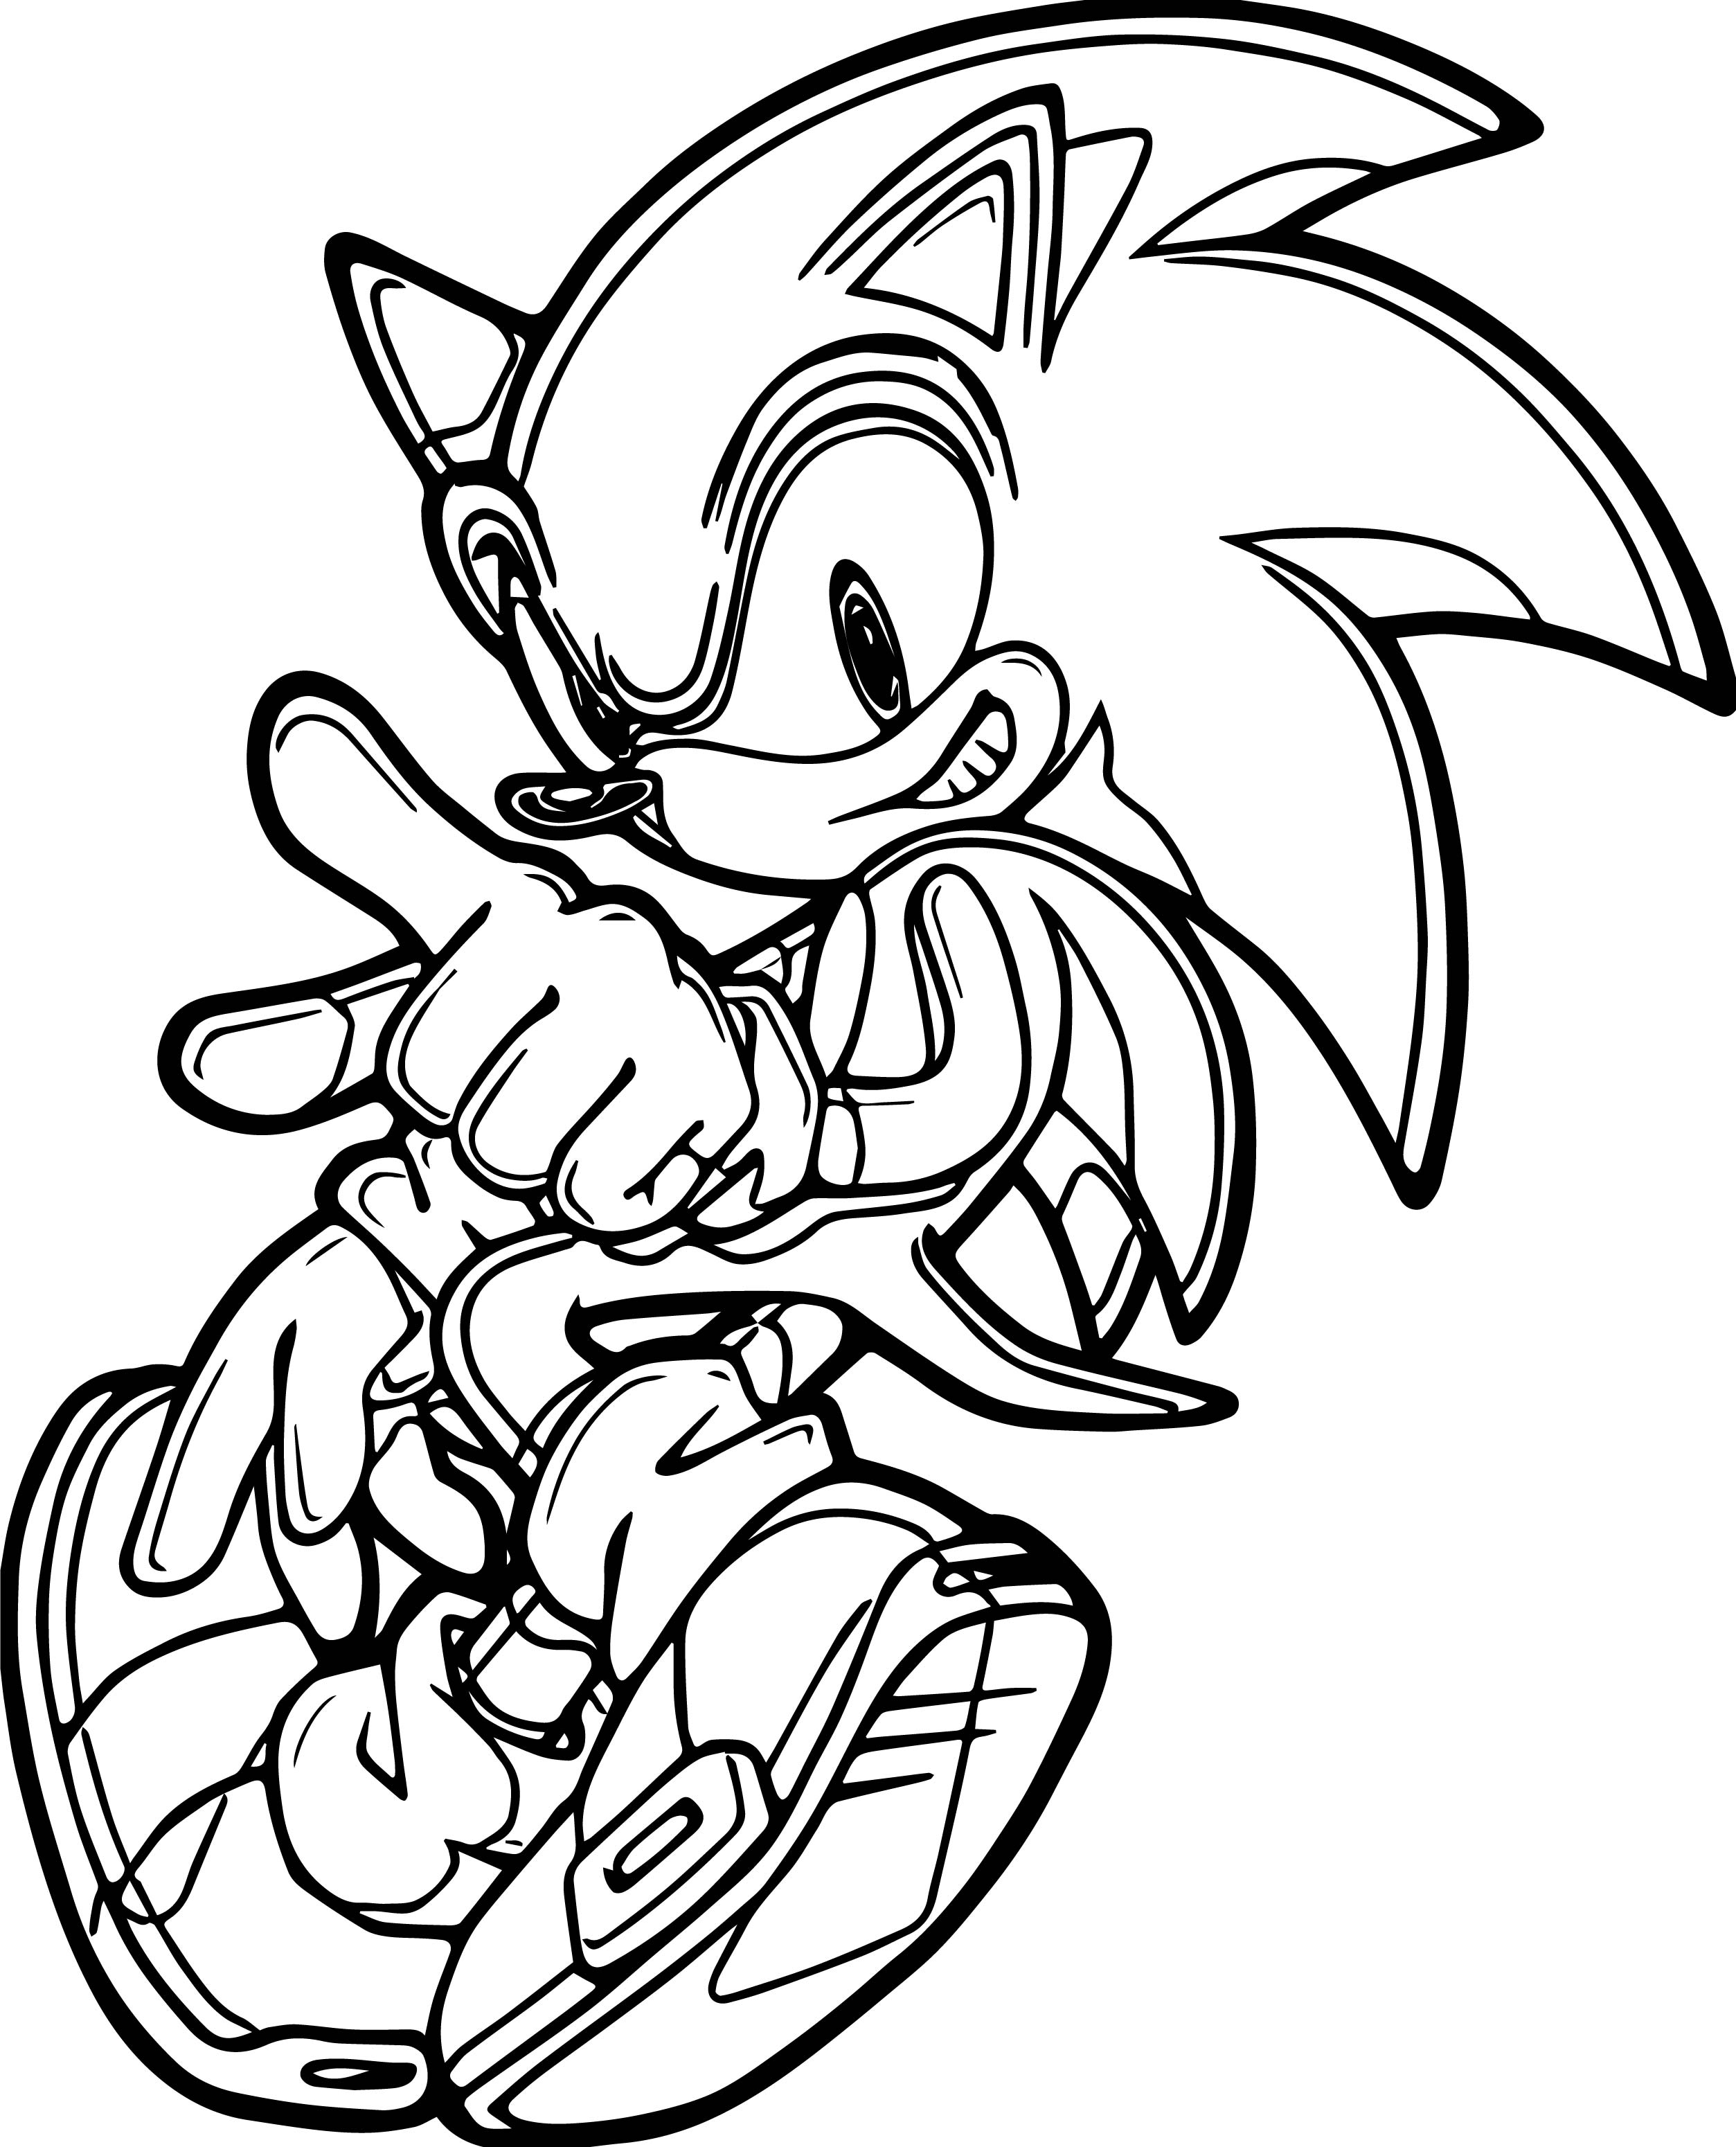 Free Printable Sonic The Hedgehog Coloring Pages - Minimalist Blank ...